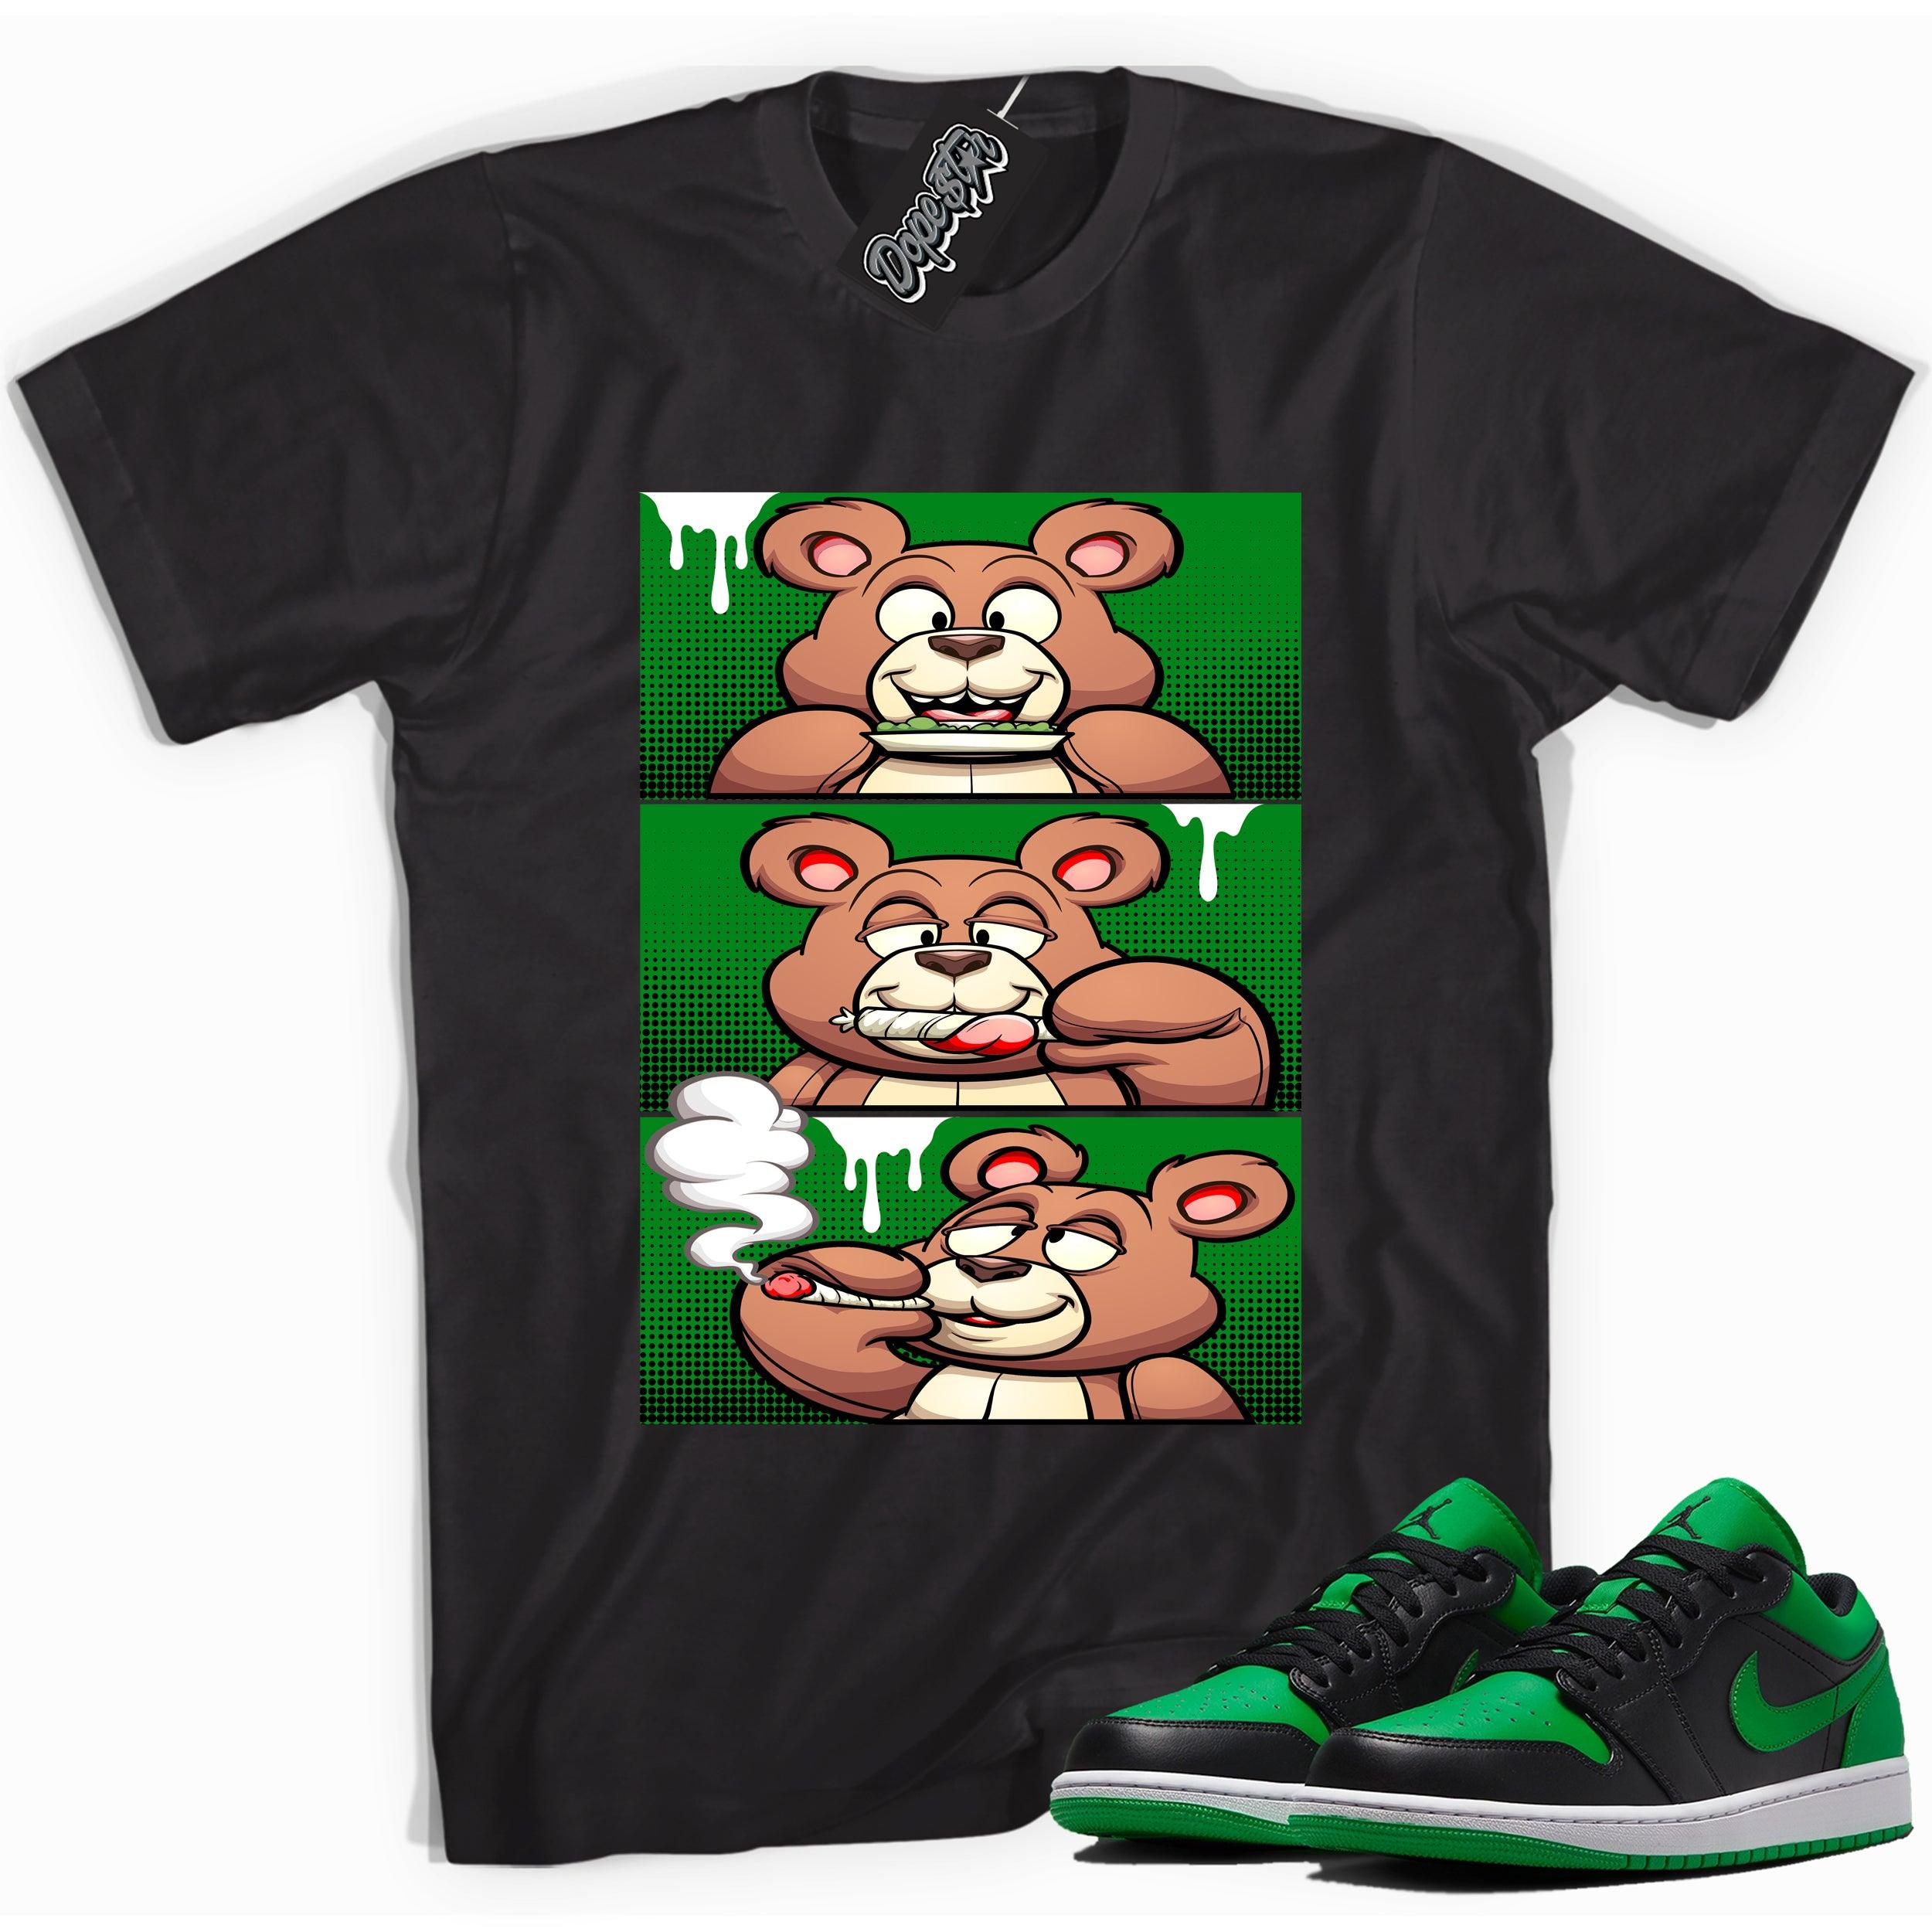 Cool black graphic tee with 'roll it lick it smoke it bear' print, that perfectly matches Air Jordan 1 Low Lucky Green sneakers